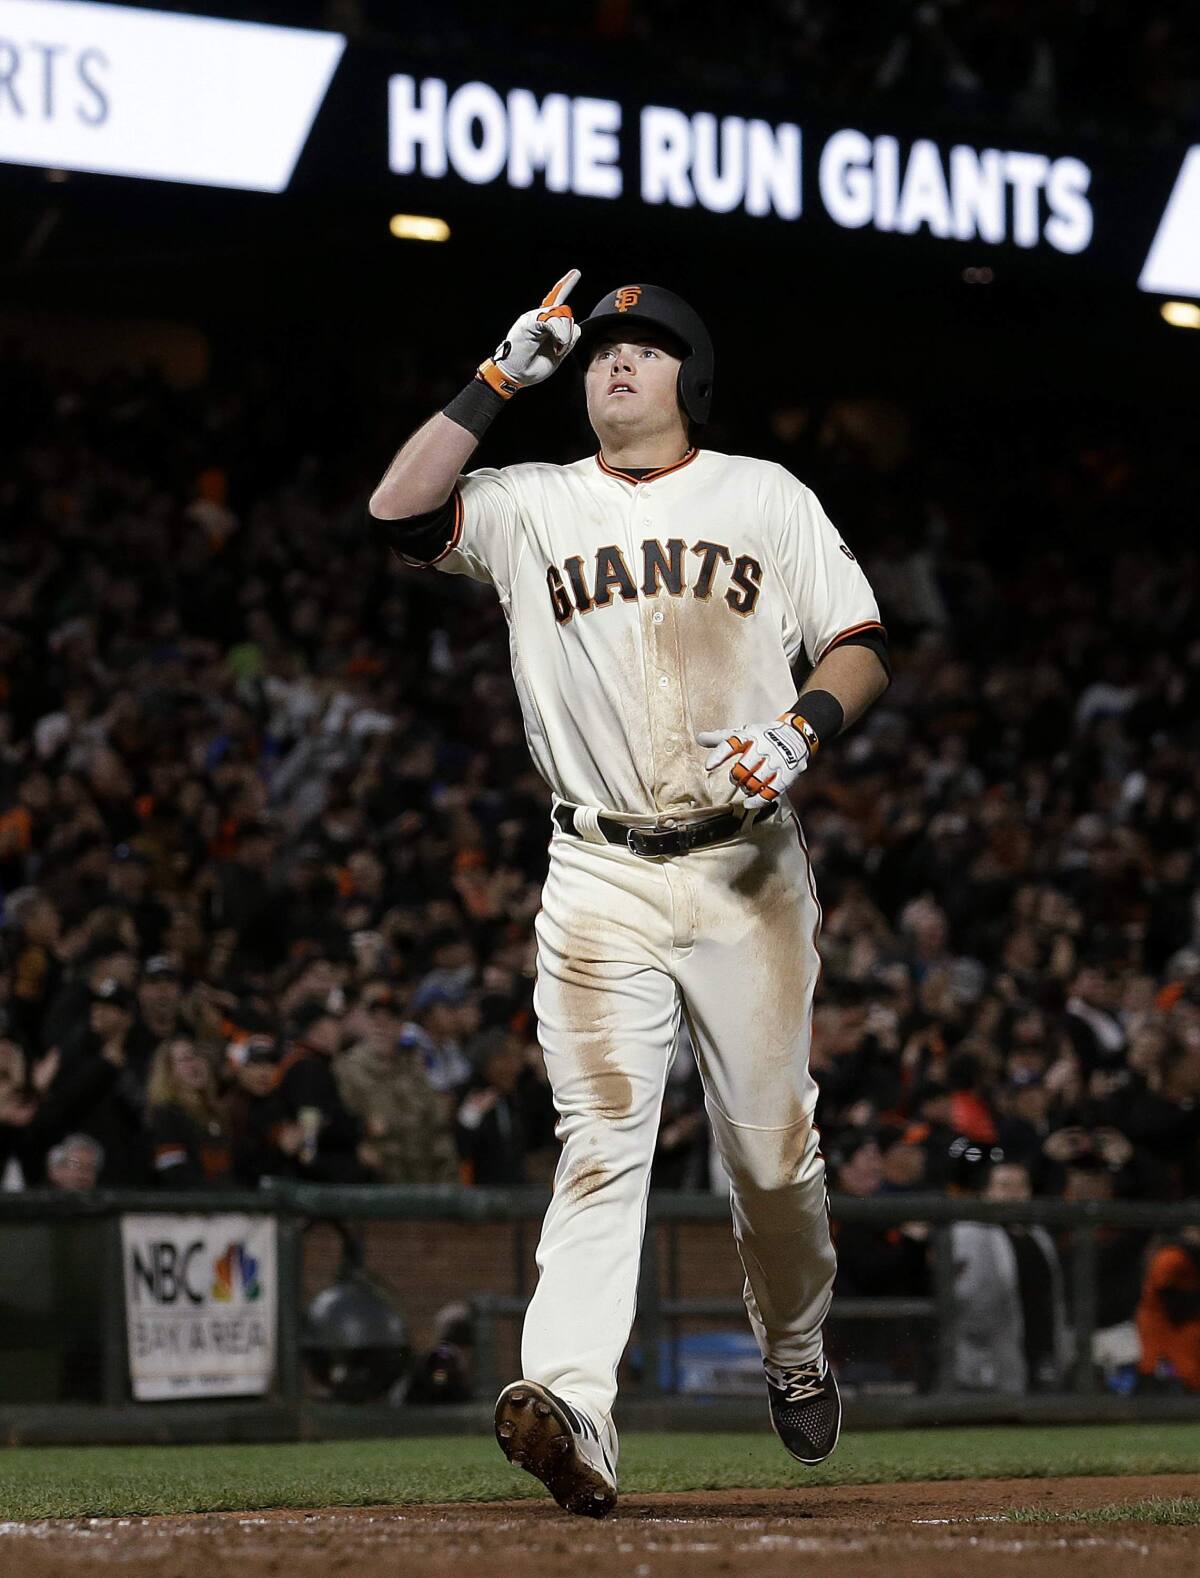 Super Mom' fueled Arroyo's rise with the Giants